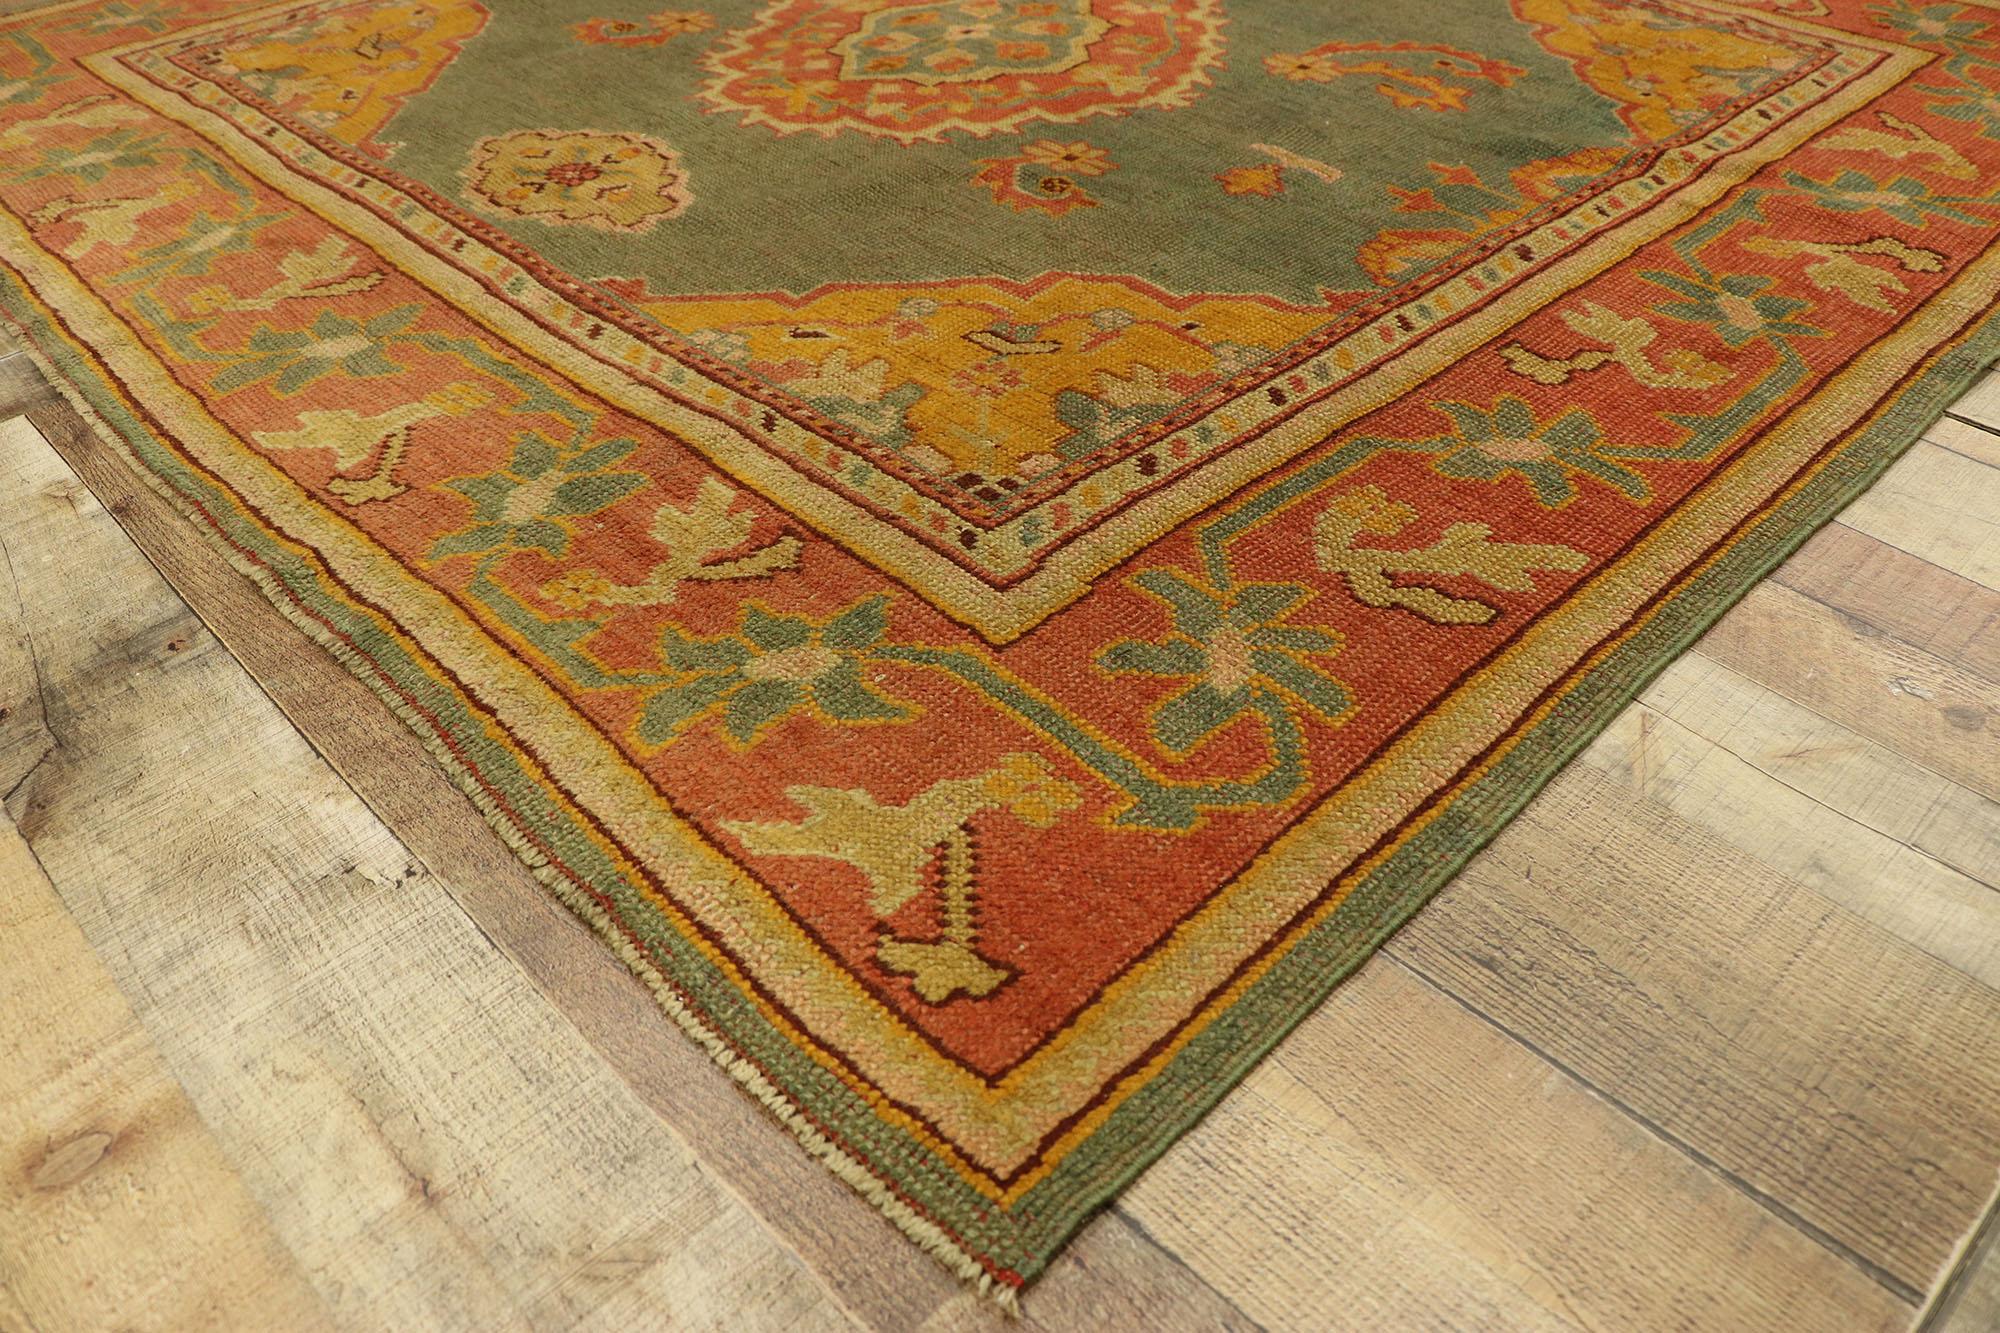 Wool Antique Turkish Oushak Rug with Modern Mediterranean and Italian Tuscan Style